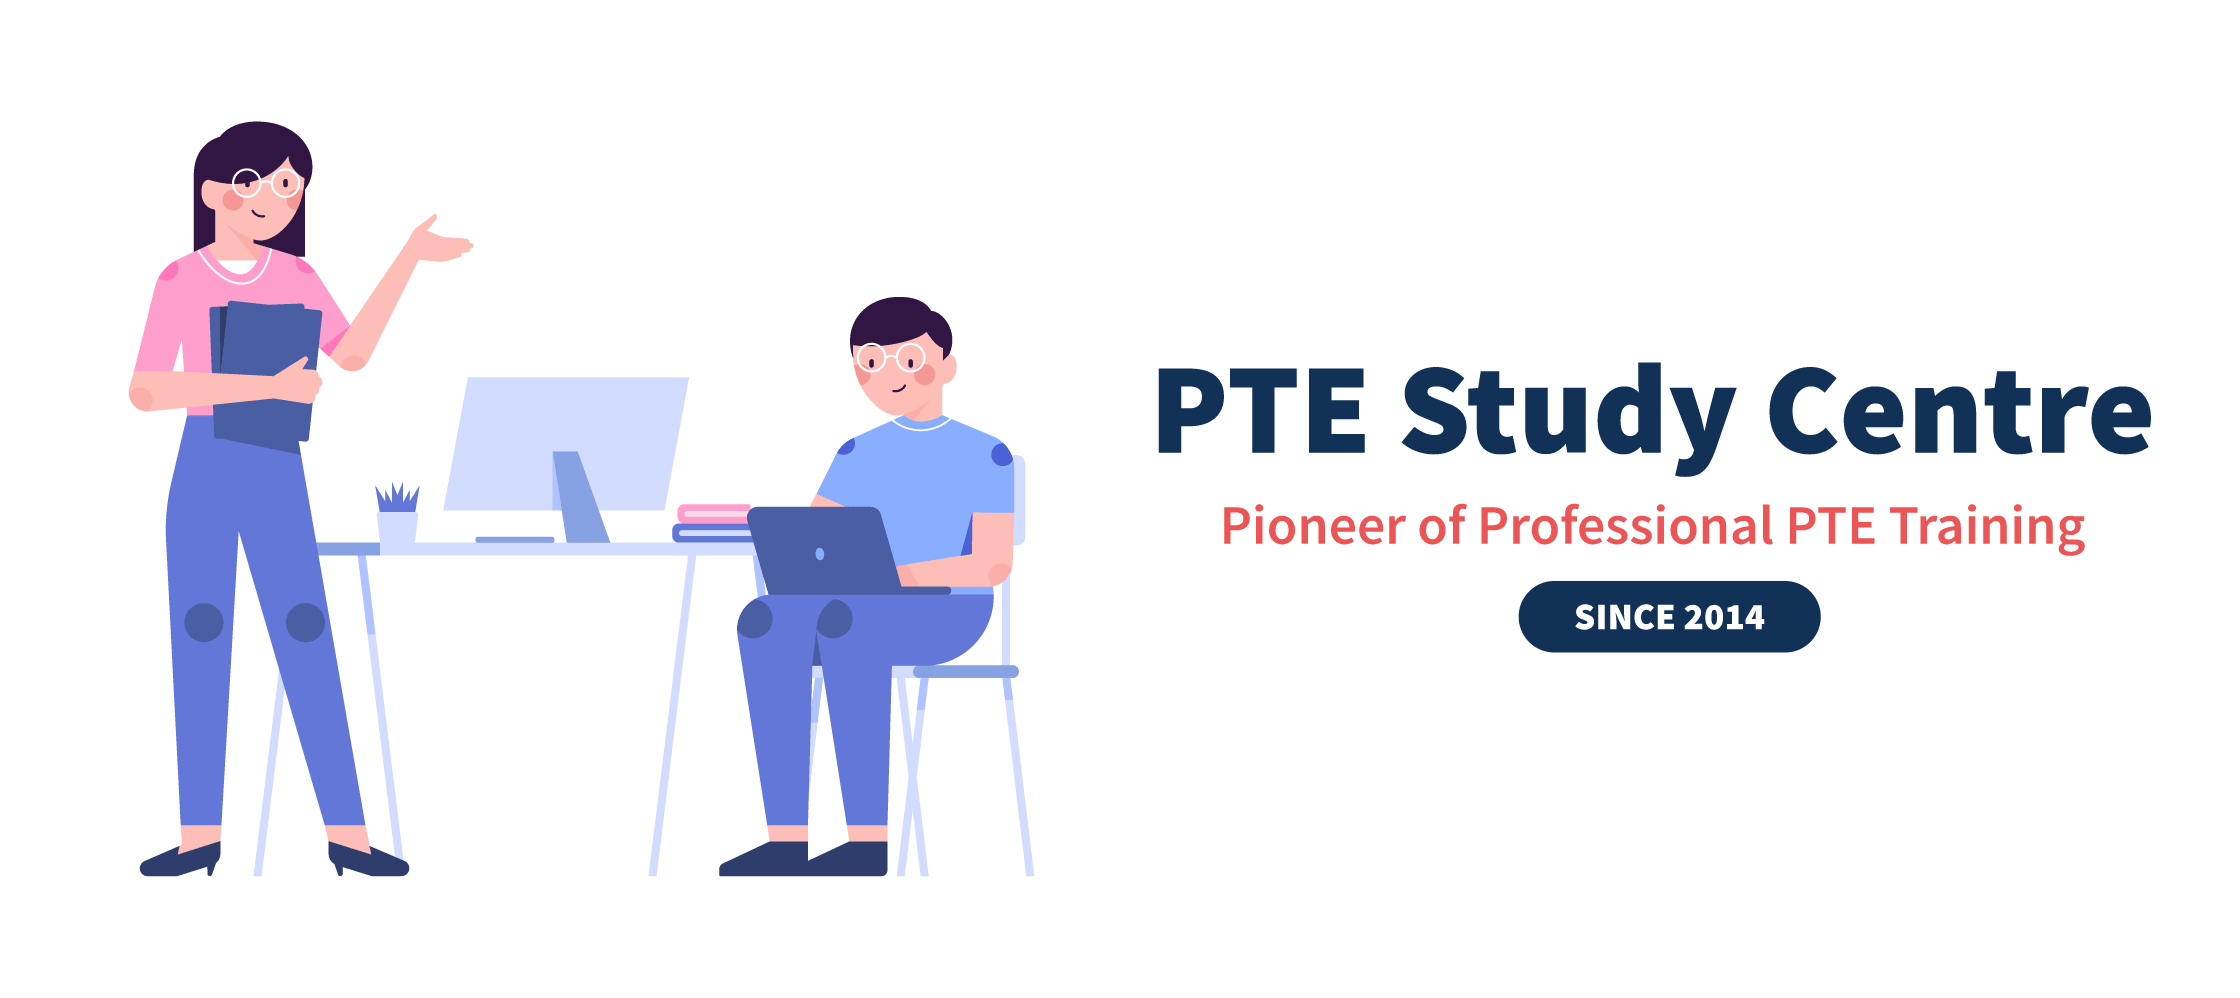 Pioneer of Professional PTE Training